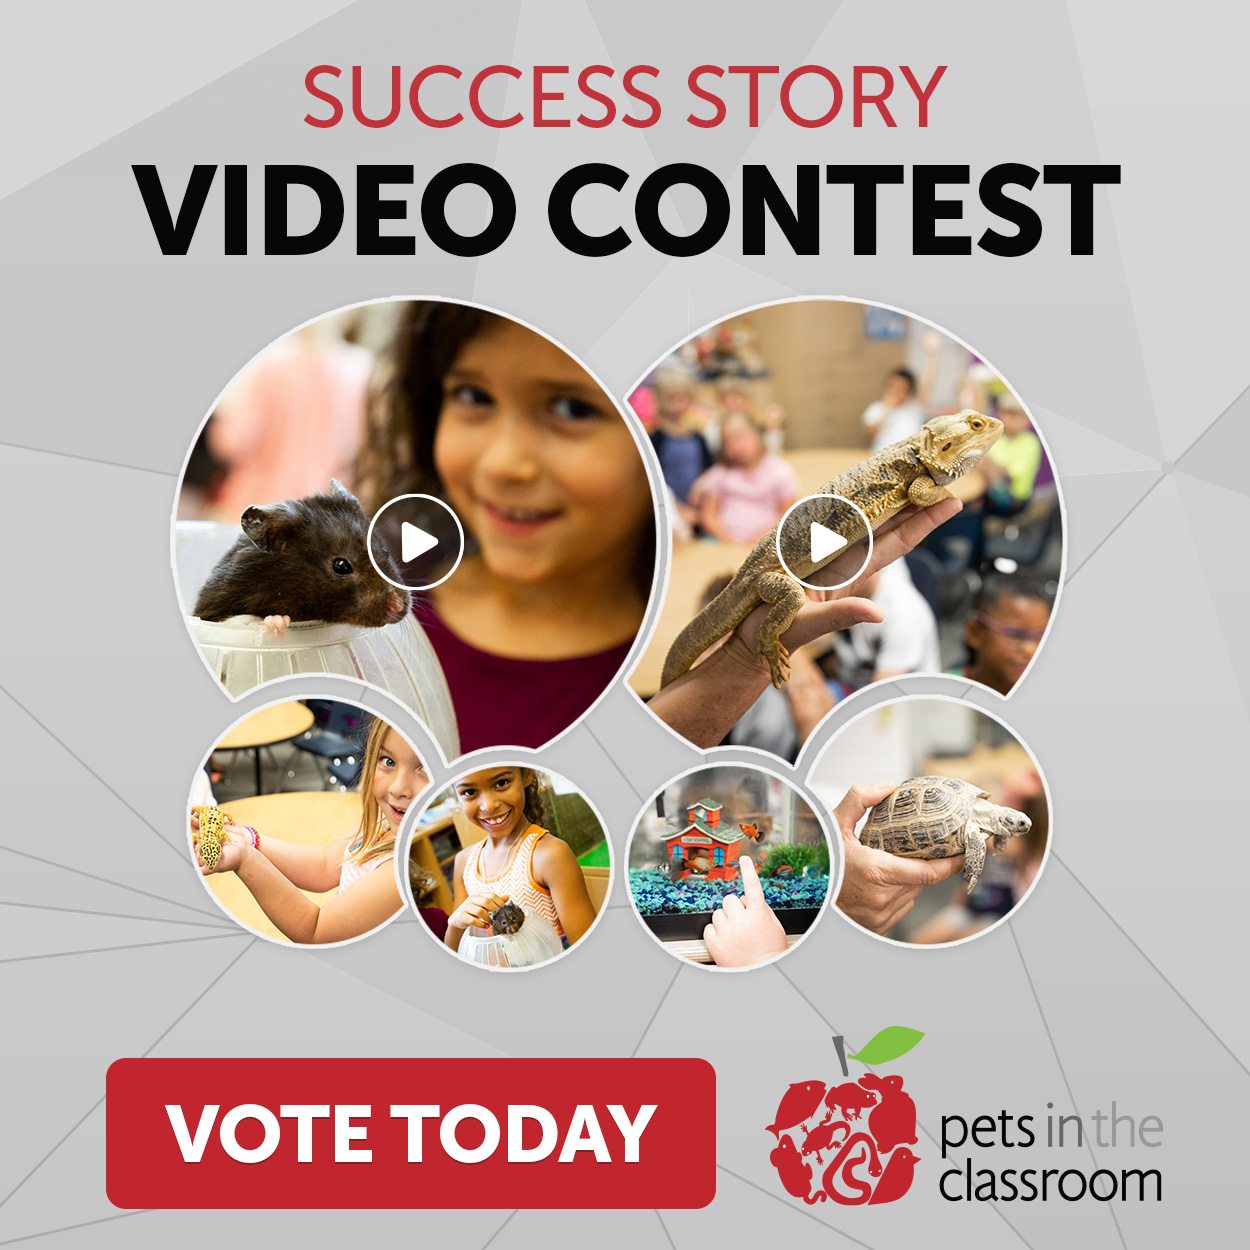 Cast Your Vote in the Pets in the Classroom Video Contest!